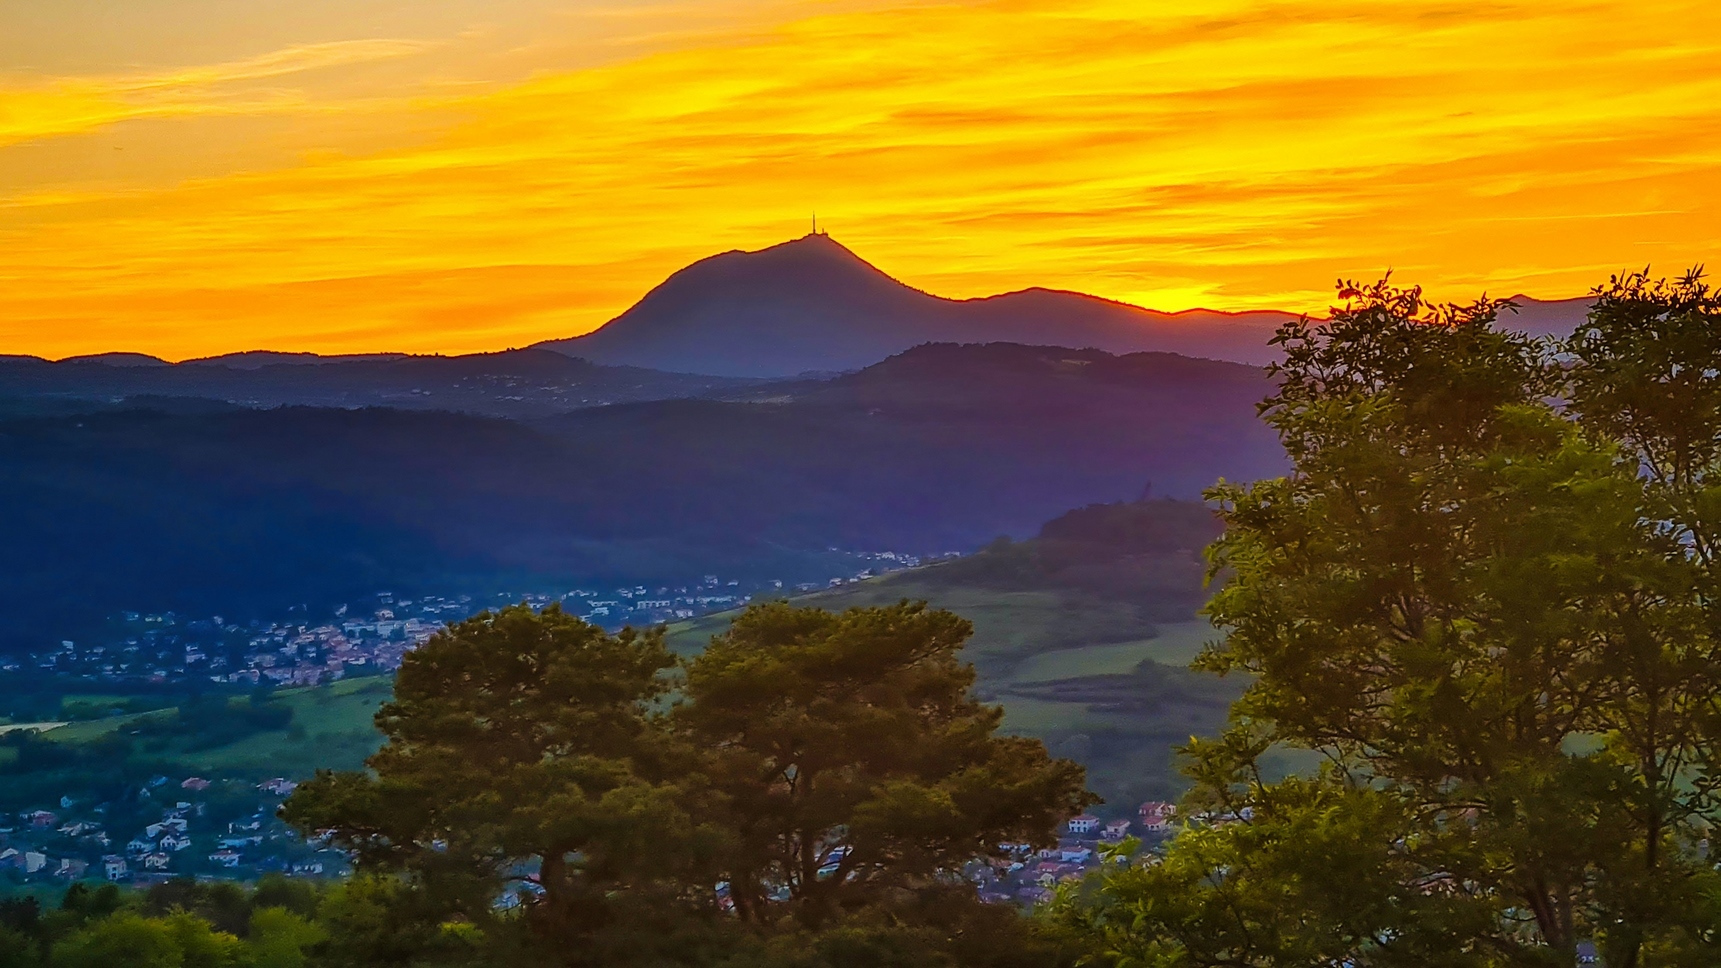 Plateau de Gergovie, sunset over the chain of Puys and the Puy de Dome